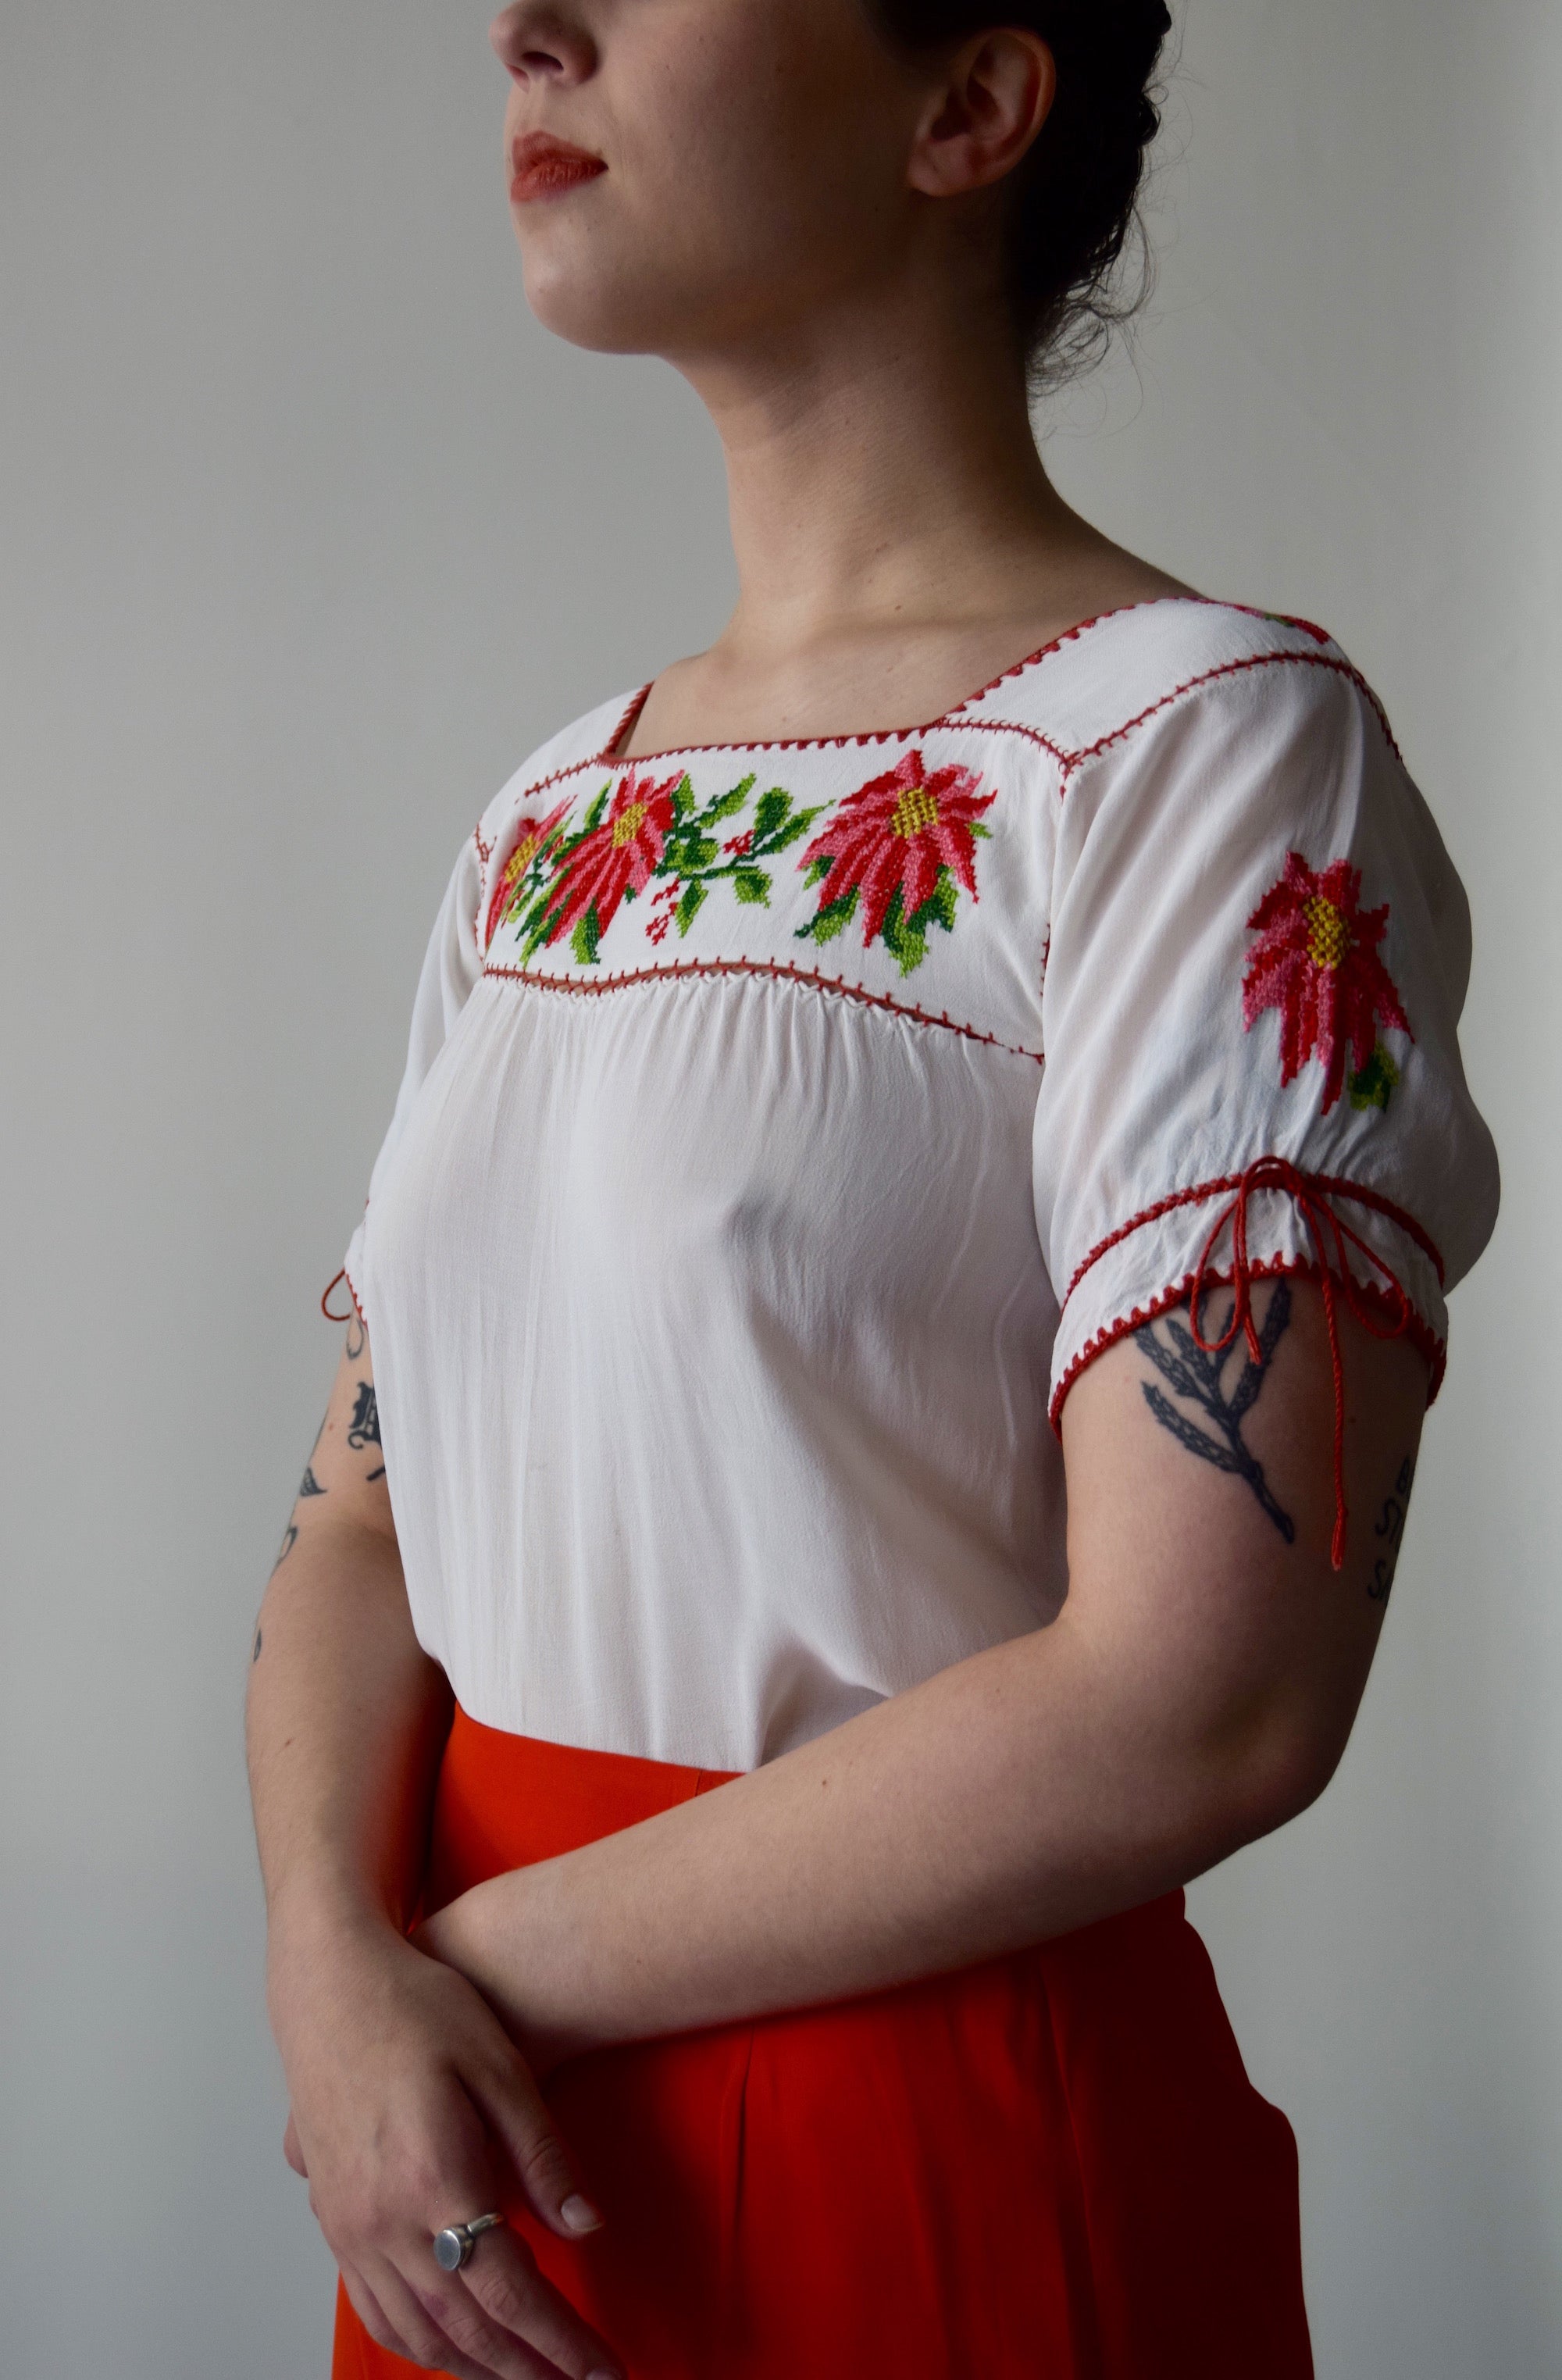 Vintage Peasant Blouse with Pink and Red Floral Embroidery